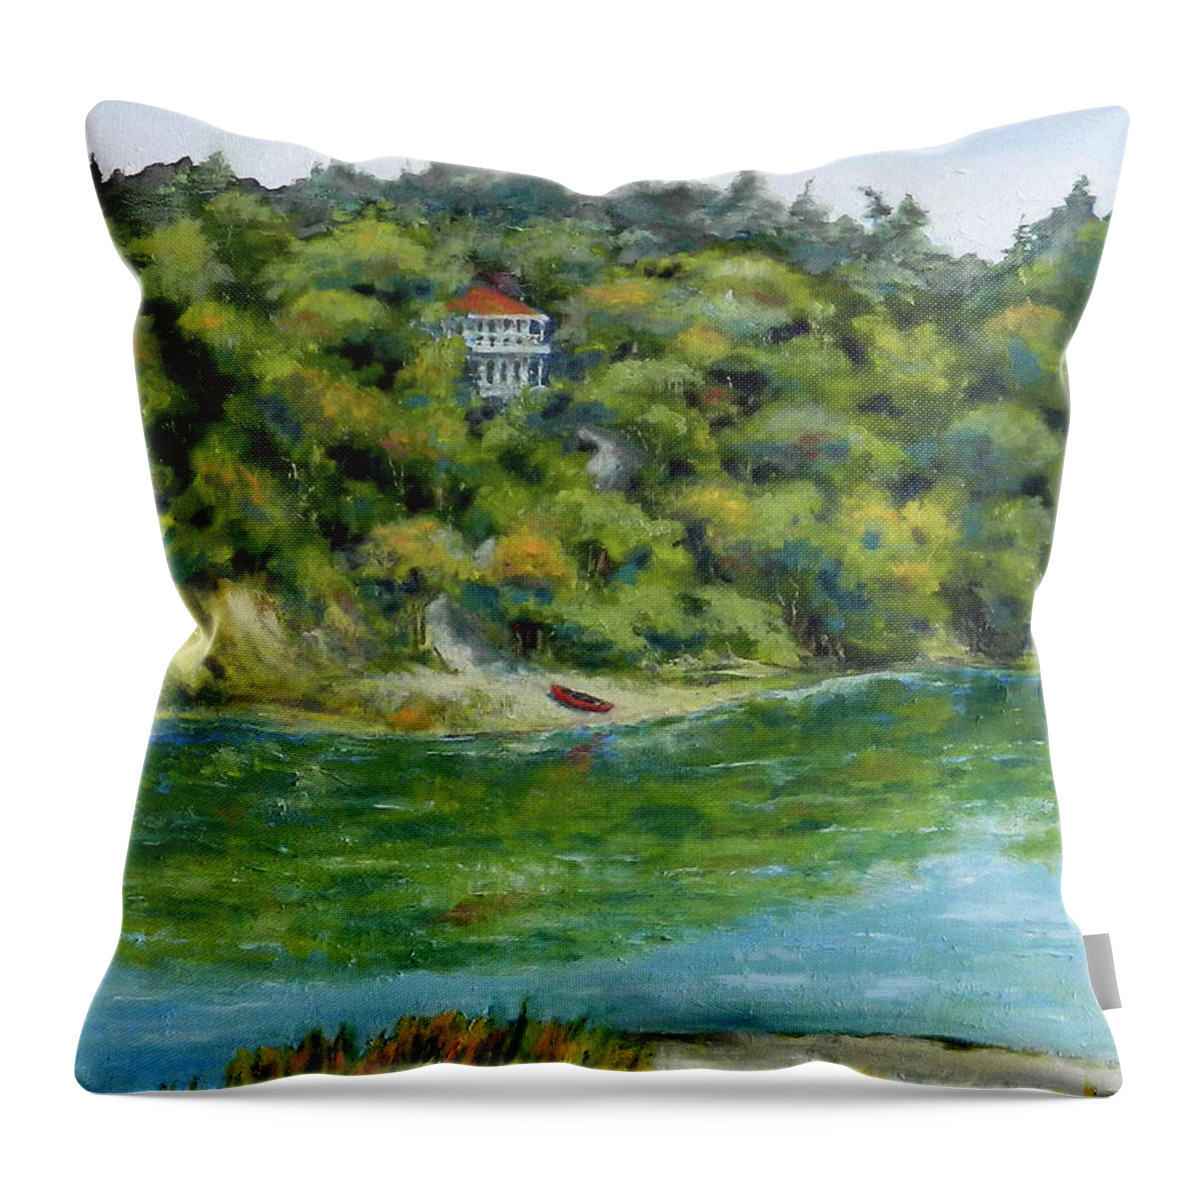 Landscape Throw Pillow featuring the painting Red Canoe by William Reed